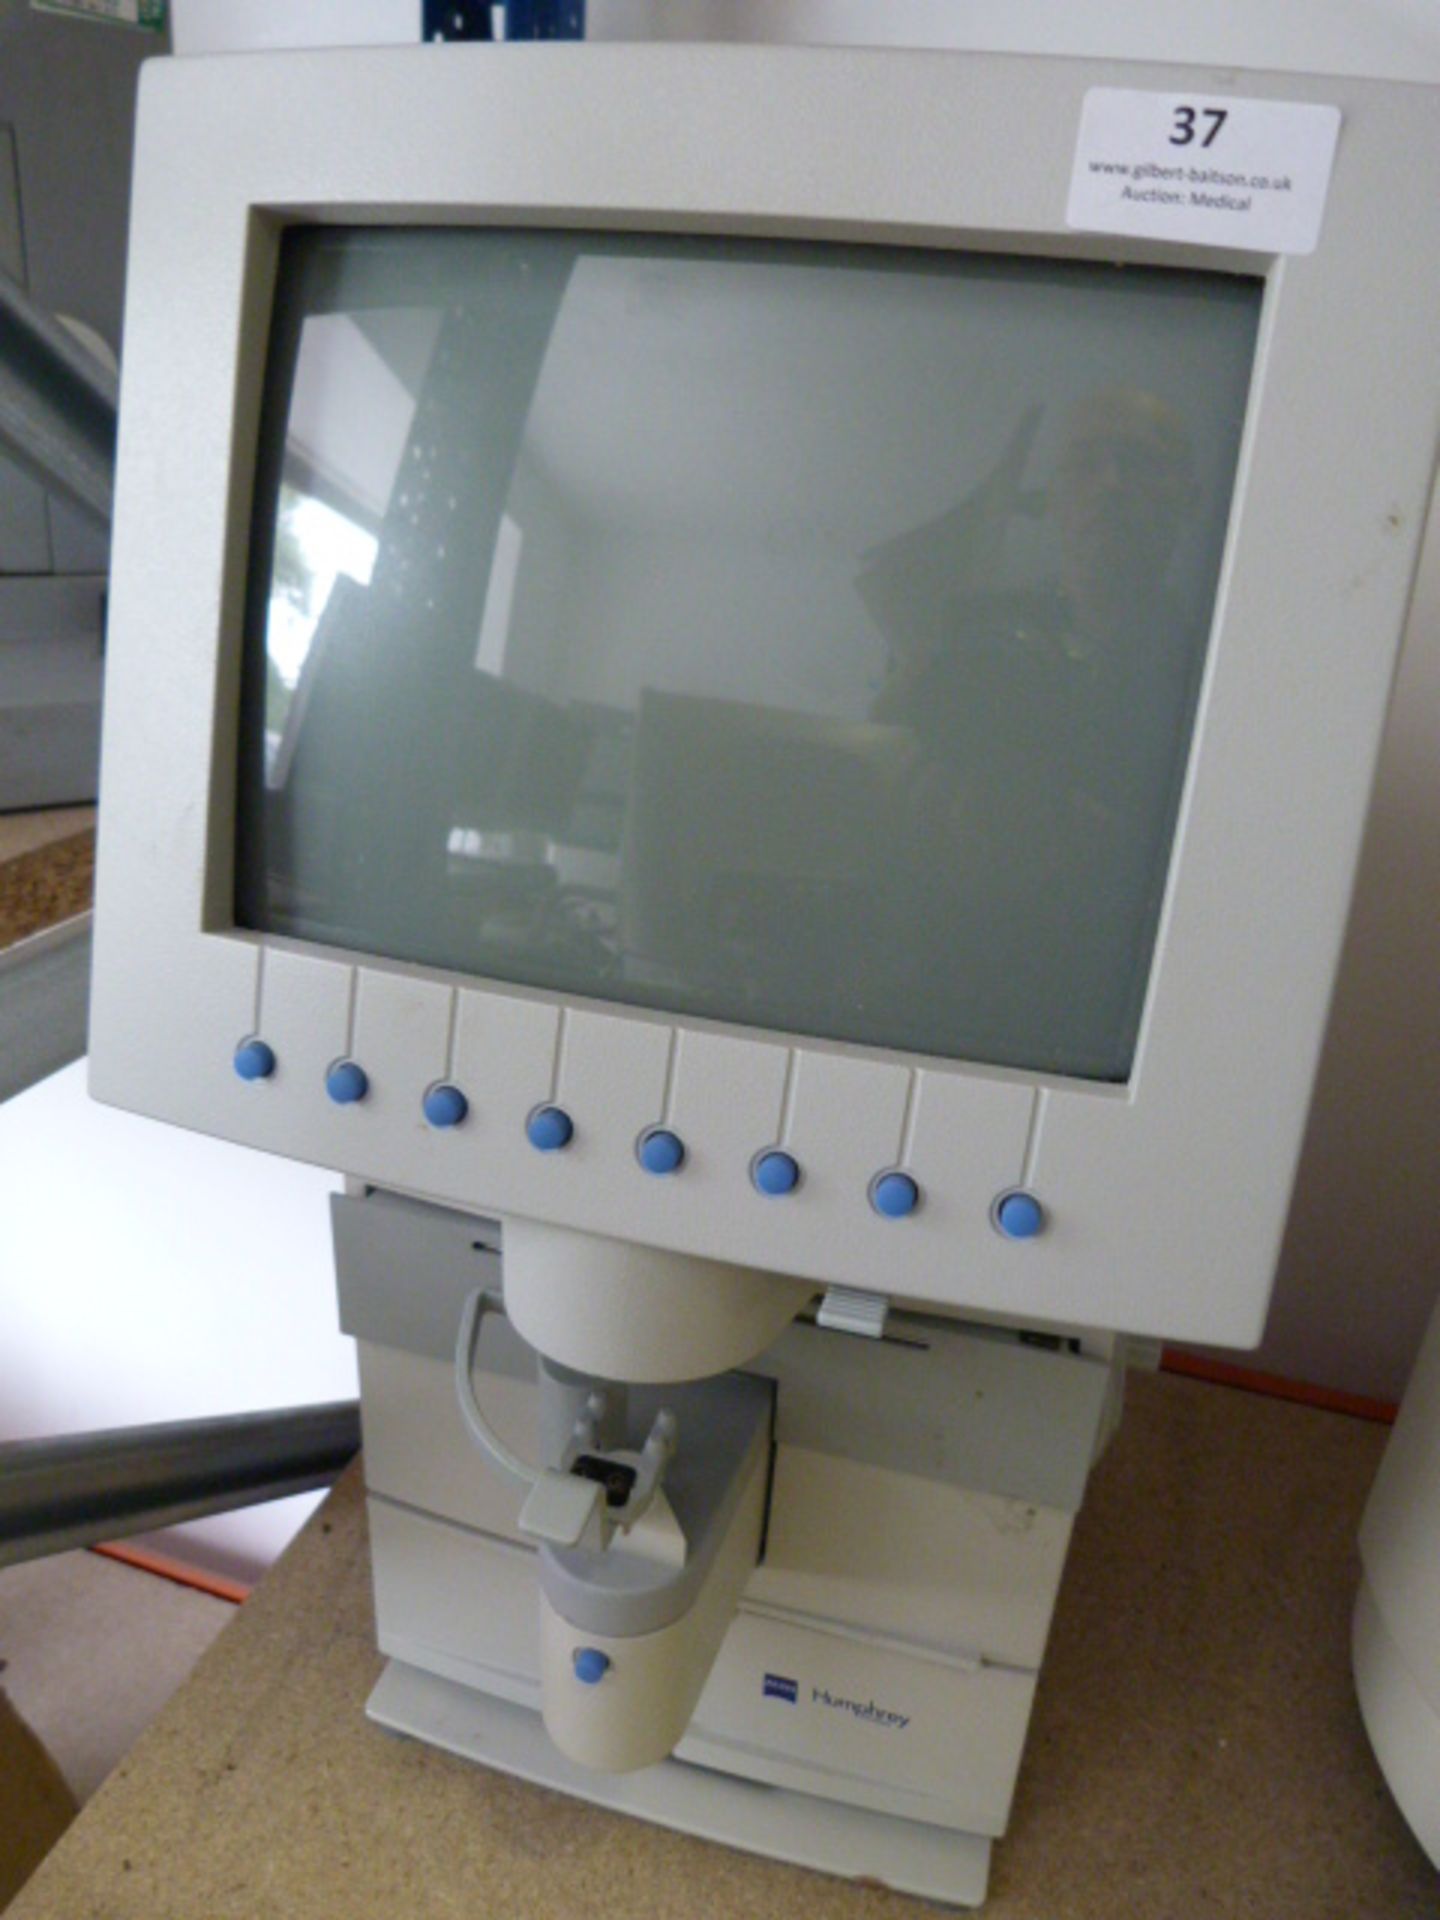 *Zeiss Humphreys Lens Analyzer Model:350 Revision A1 with Printer